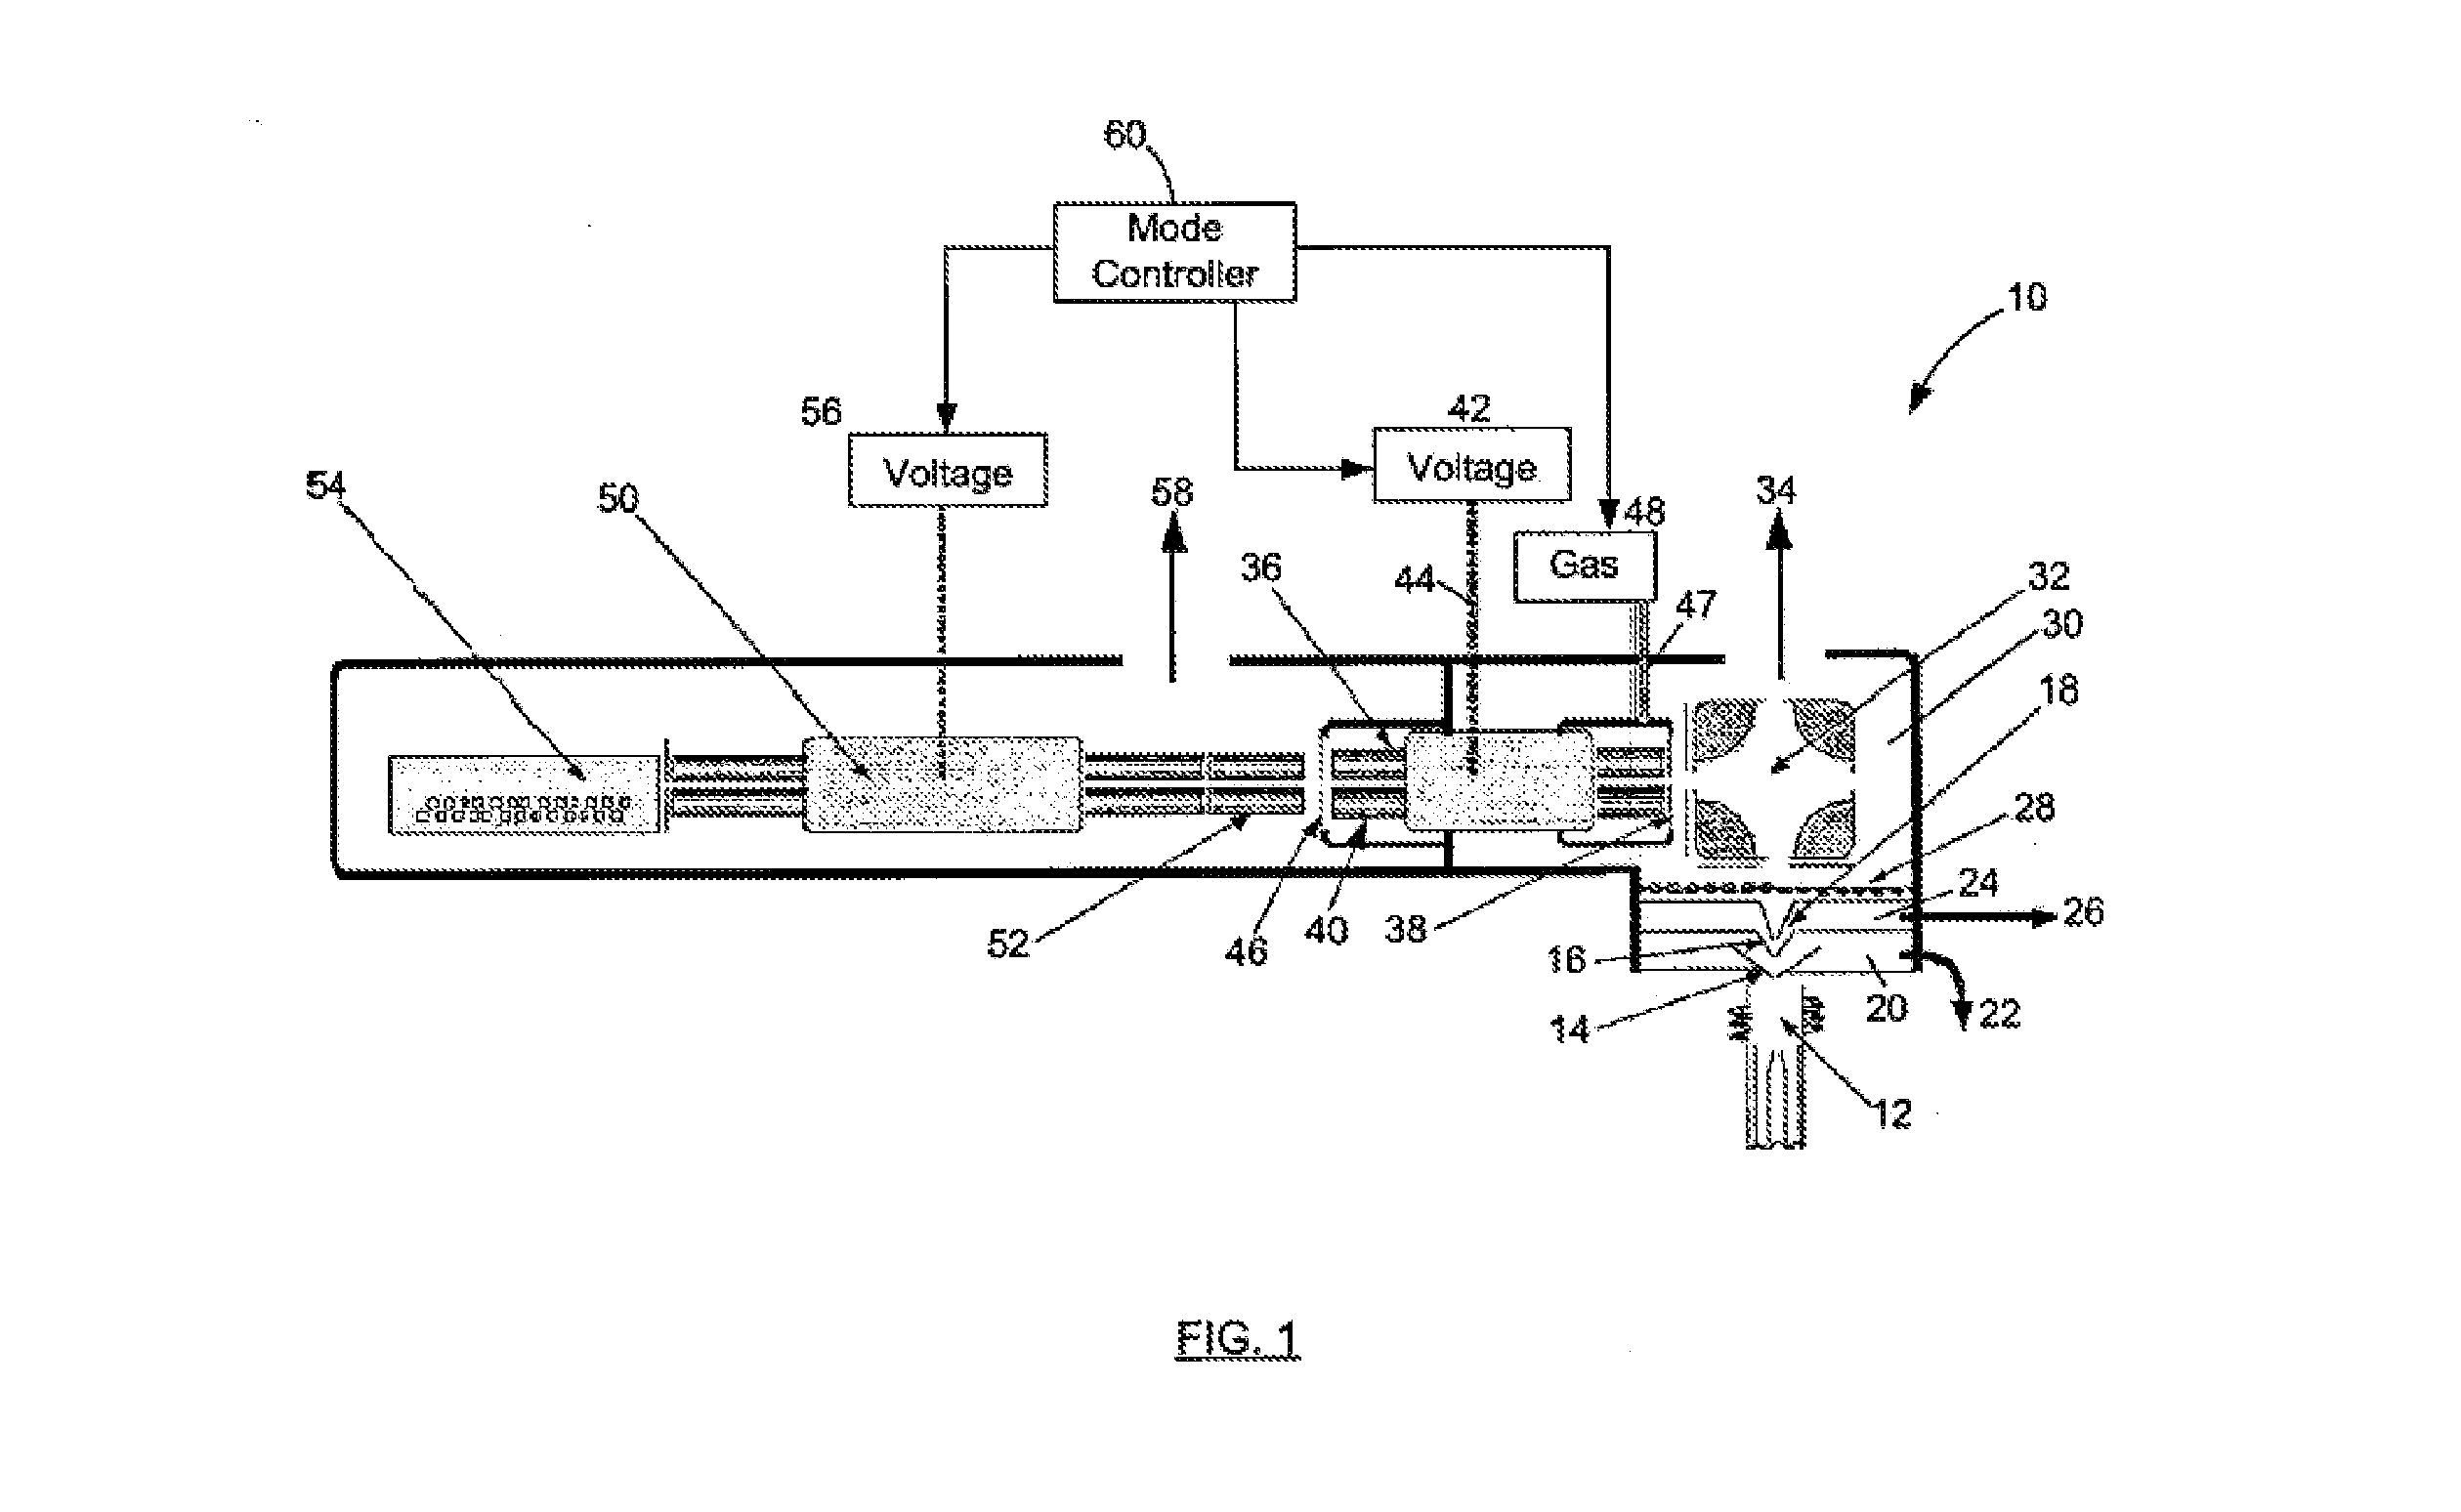 Multimode cells and methods of using them